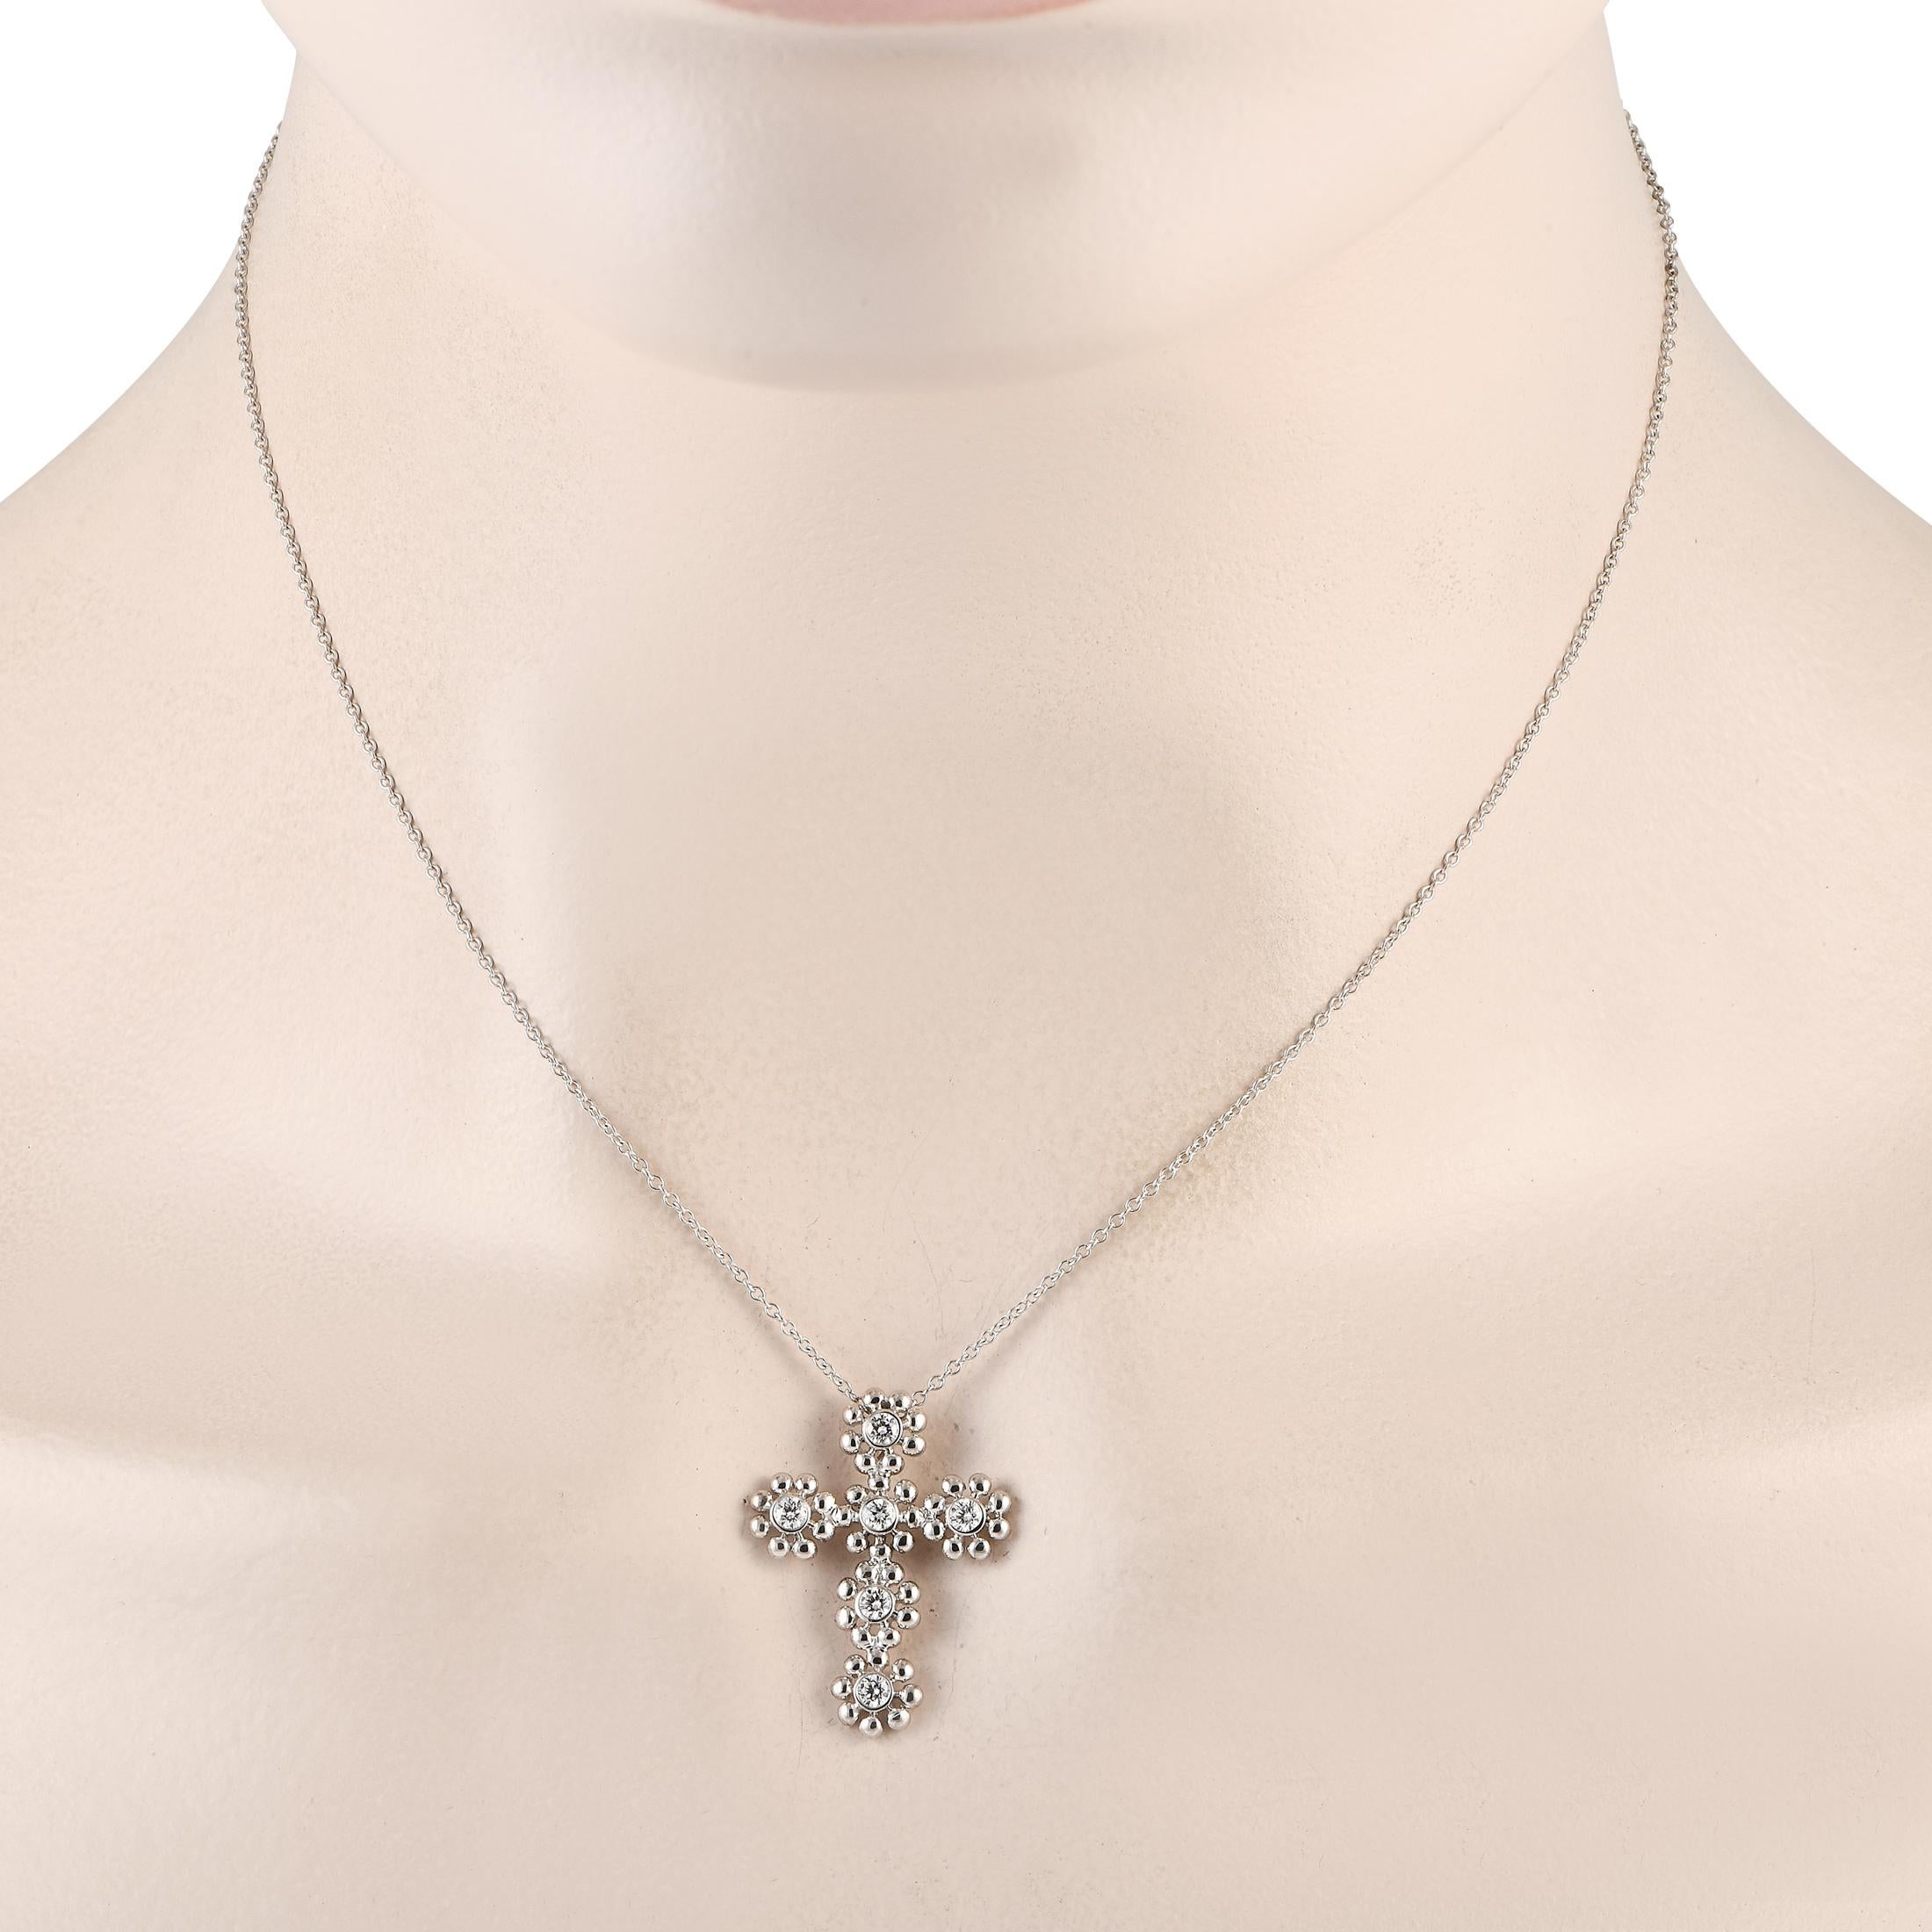 This luxurious necklace from Tiffany & Co. will serve as a scintillating symbol of your faith. The cross-shaped pendant is crafted from 18K White Gold and is elevated by sparkling diamonds with a total weight of 0.30 carats. It\u2019s suspended from